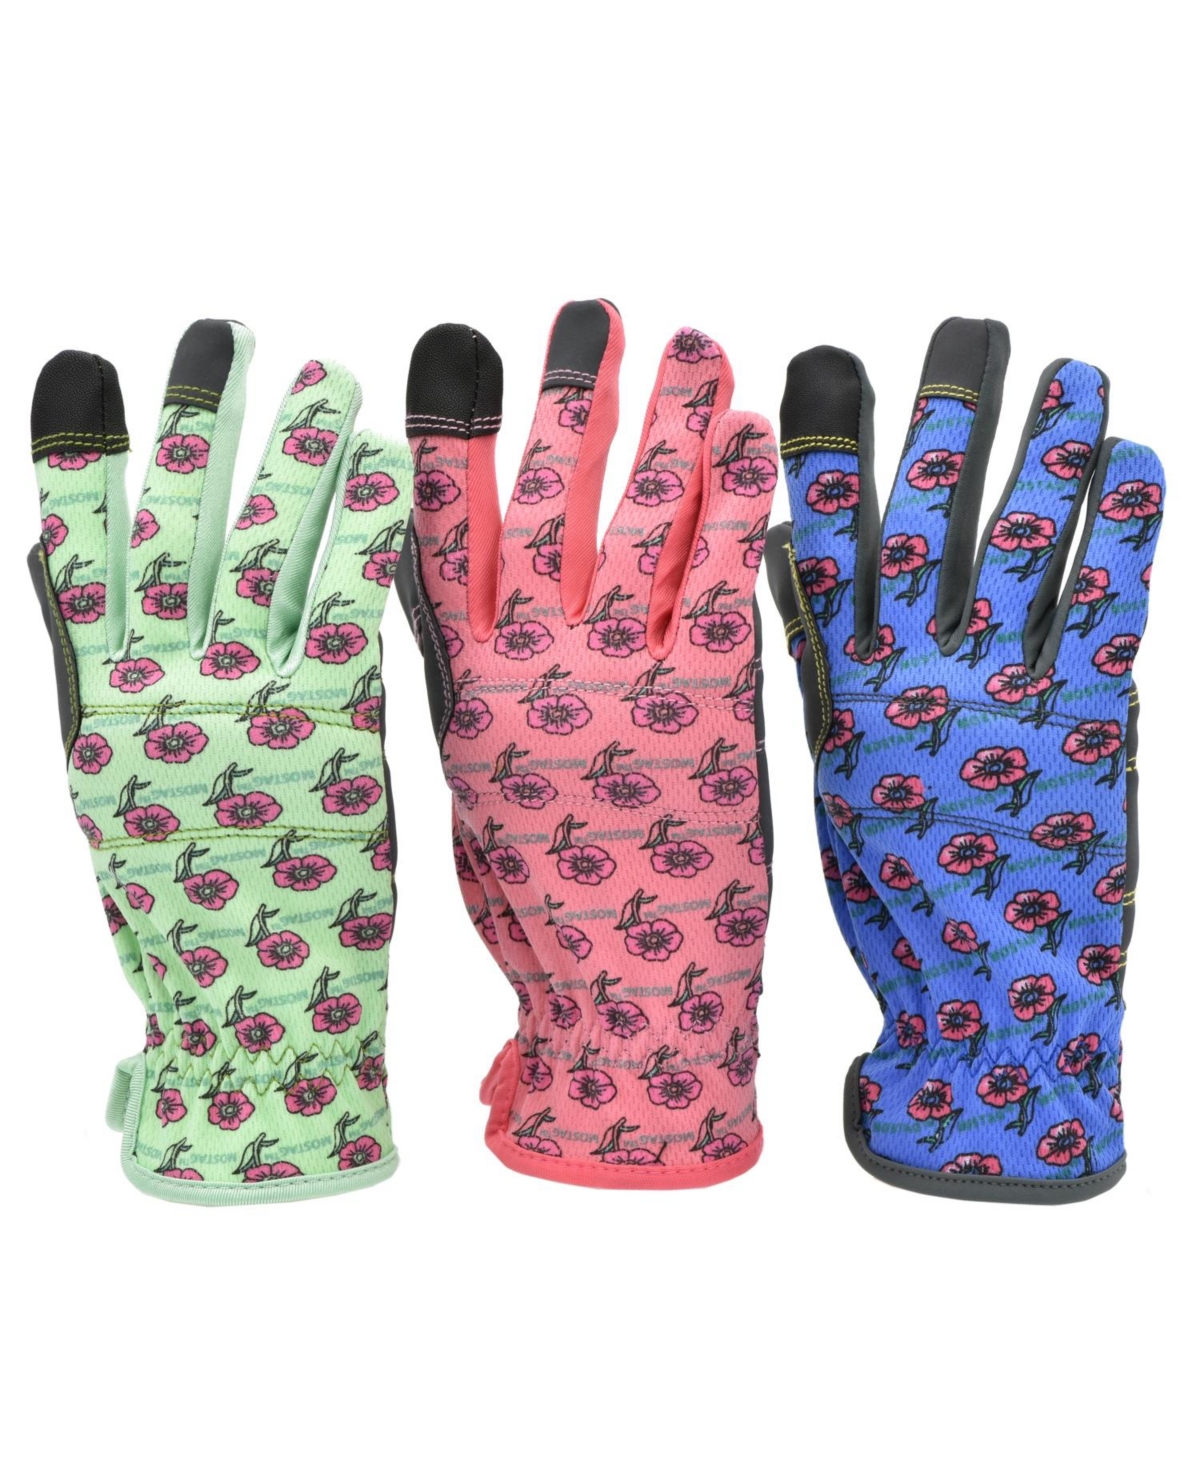 3 Pair Value Pack Women All Purpose gardening Gloves assorted colors - Assorted Pre-pack